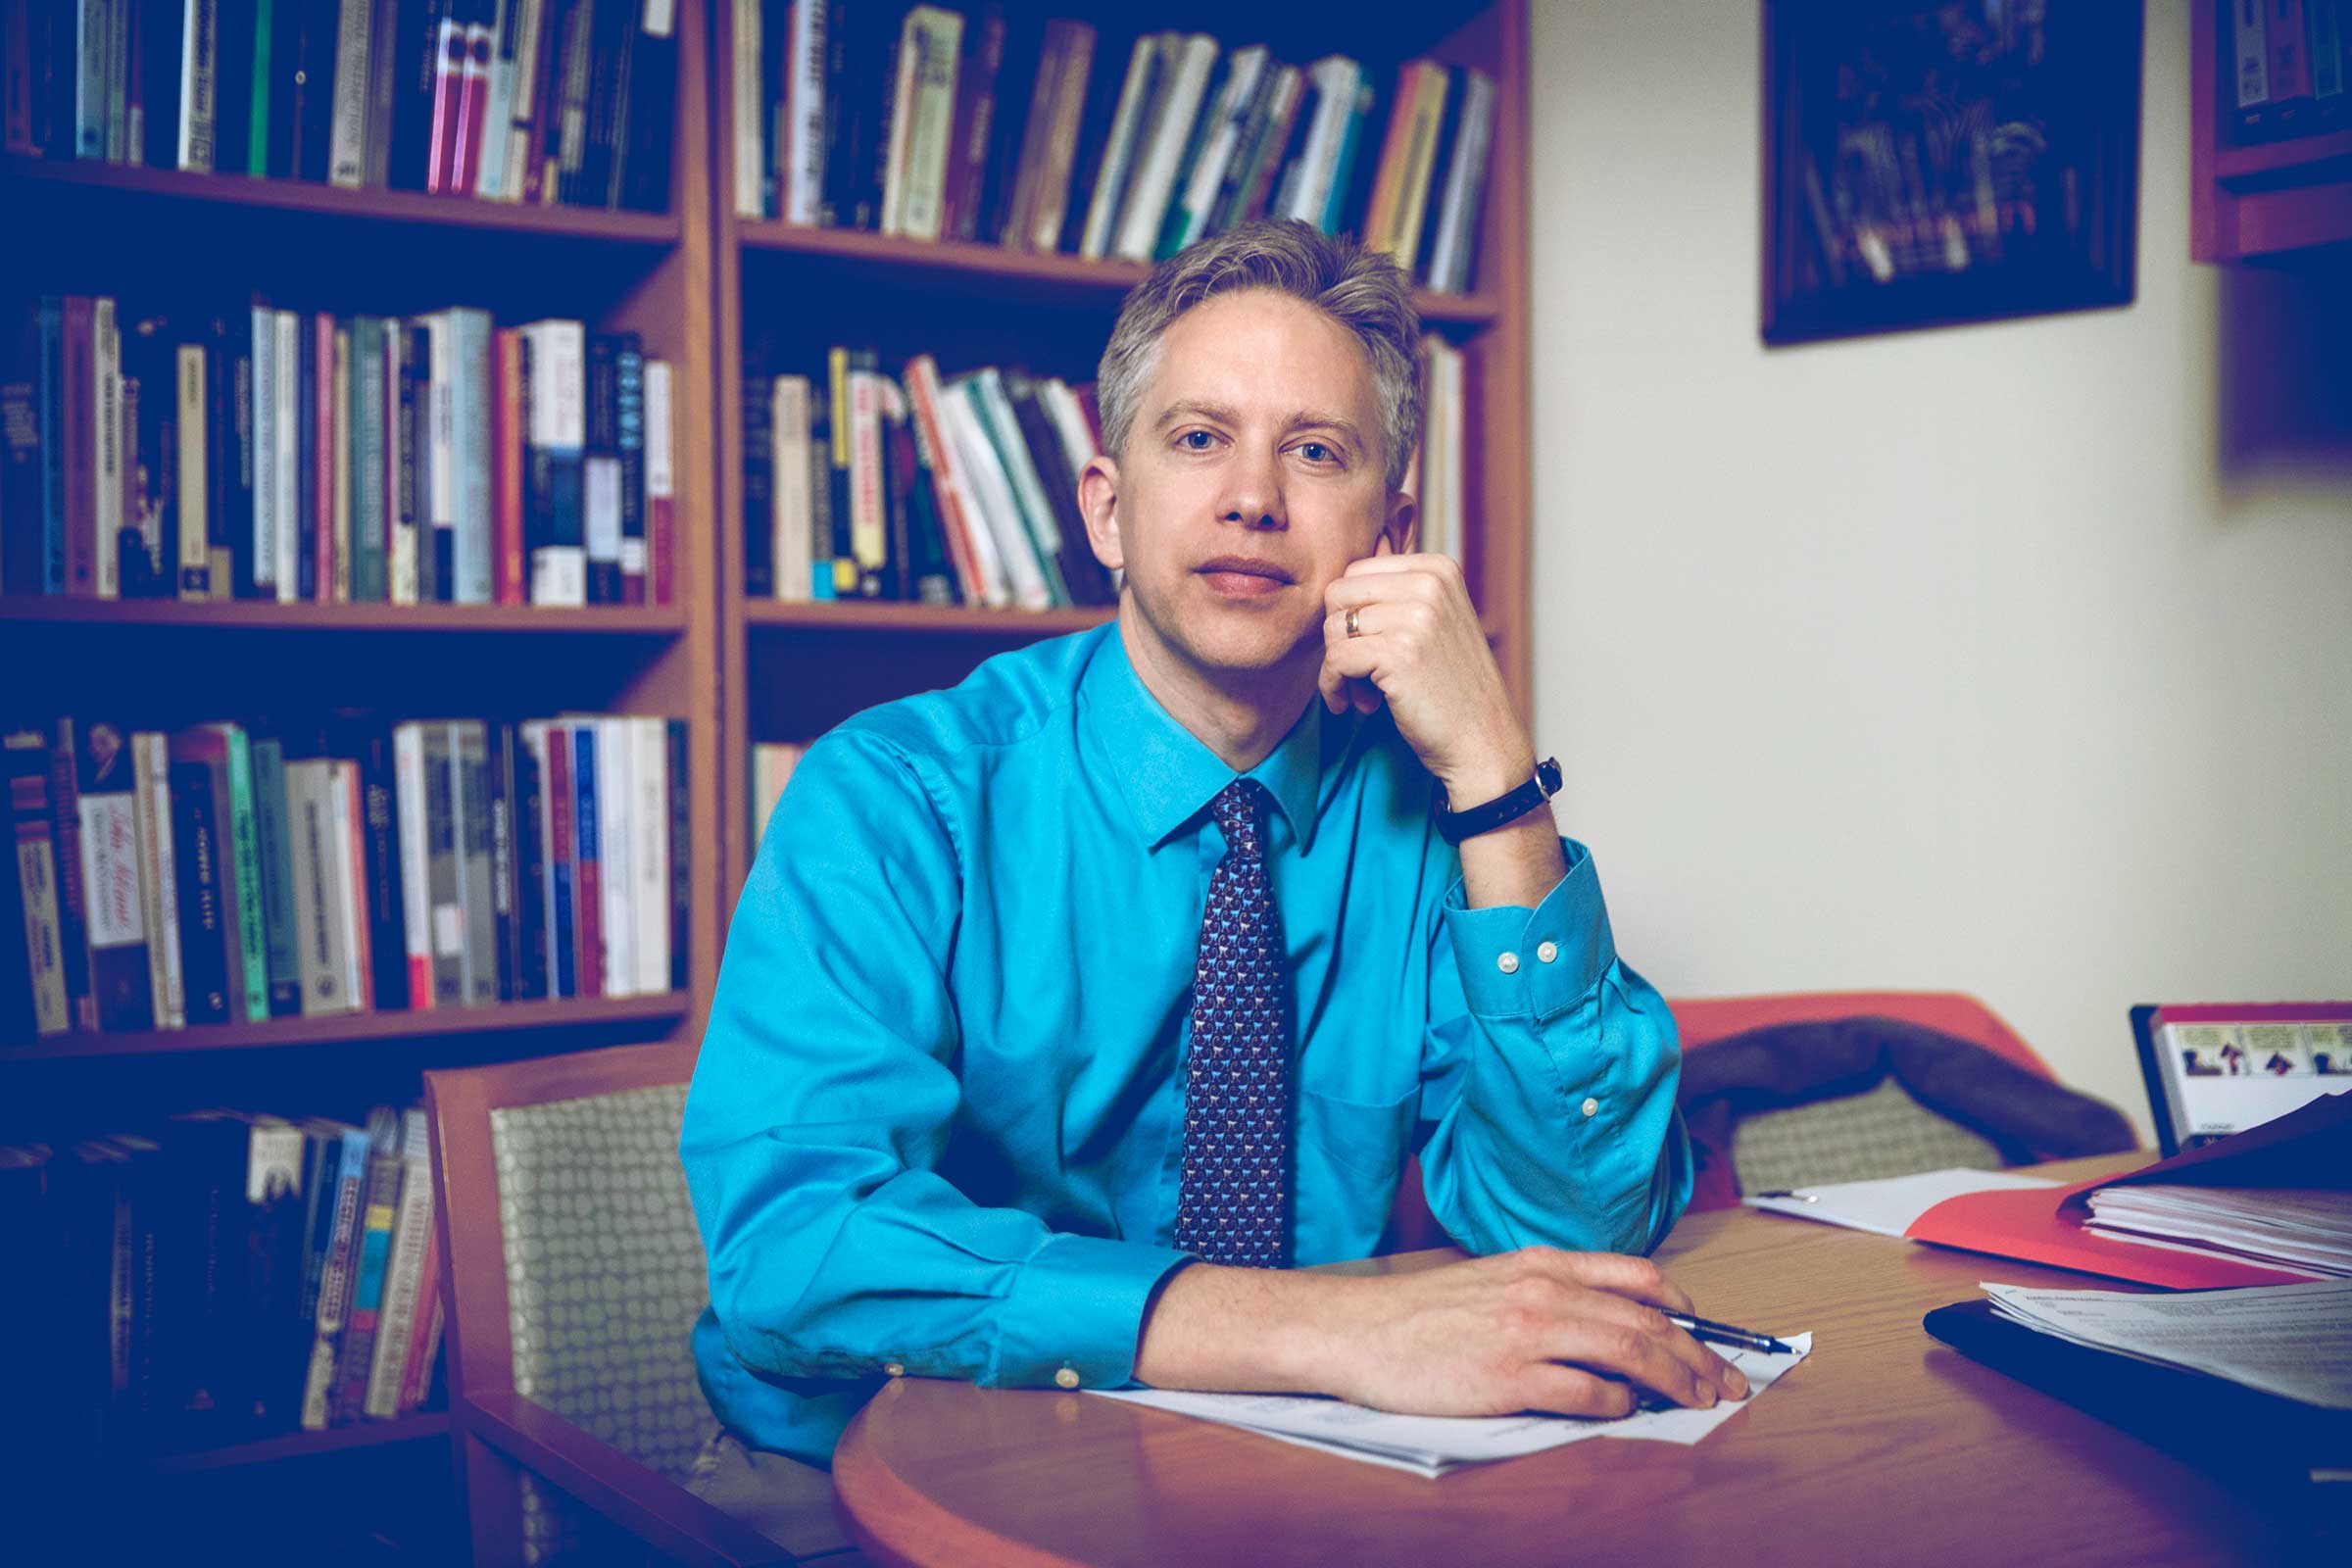 Craig Volden is a professor of public policy and politics and associate dean for academic affairs at the Frank Batten School of Leadership and Public Policy.